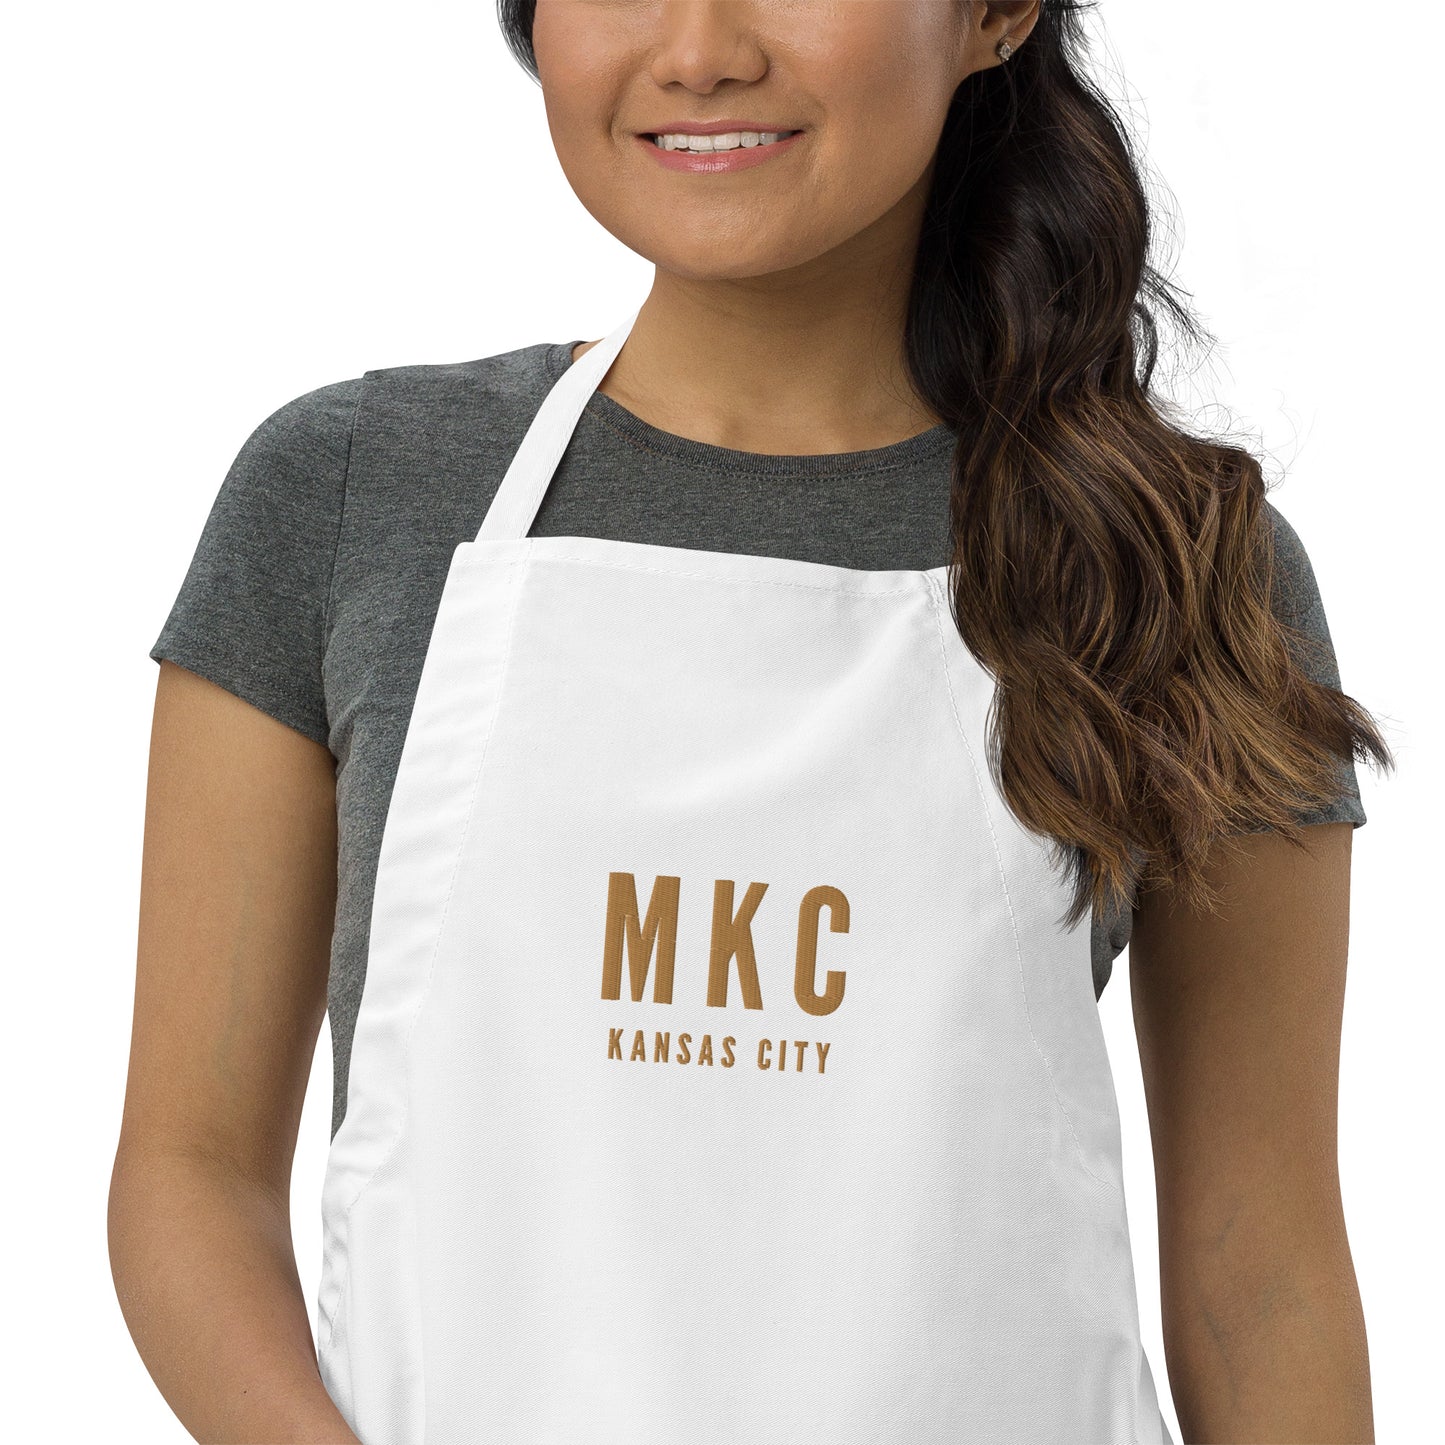 City Embroidered Apron - Old Gold • MKC Kansas City • YHM Designs - Image 08